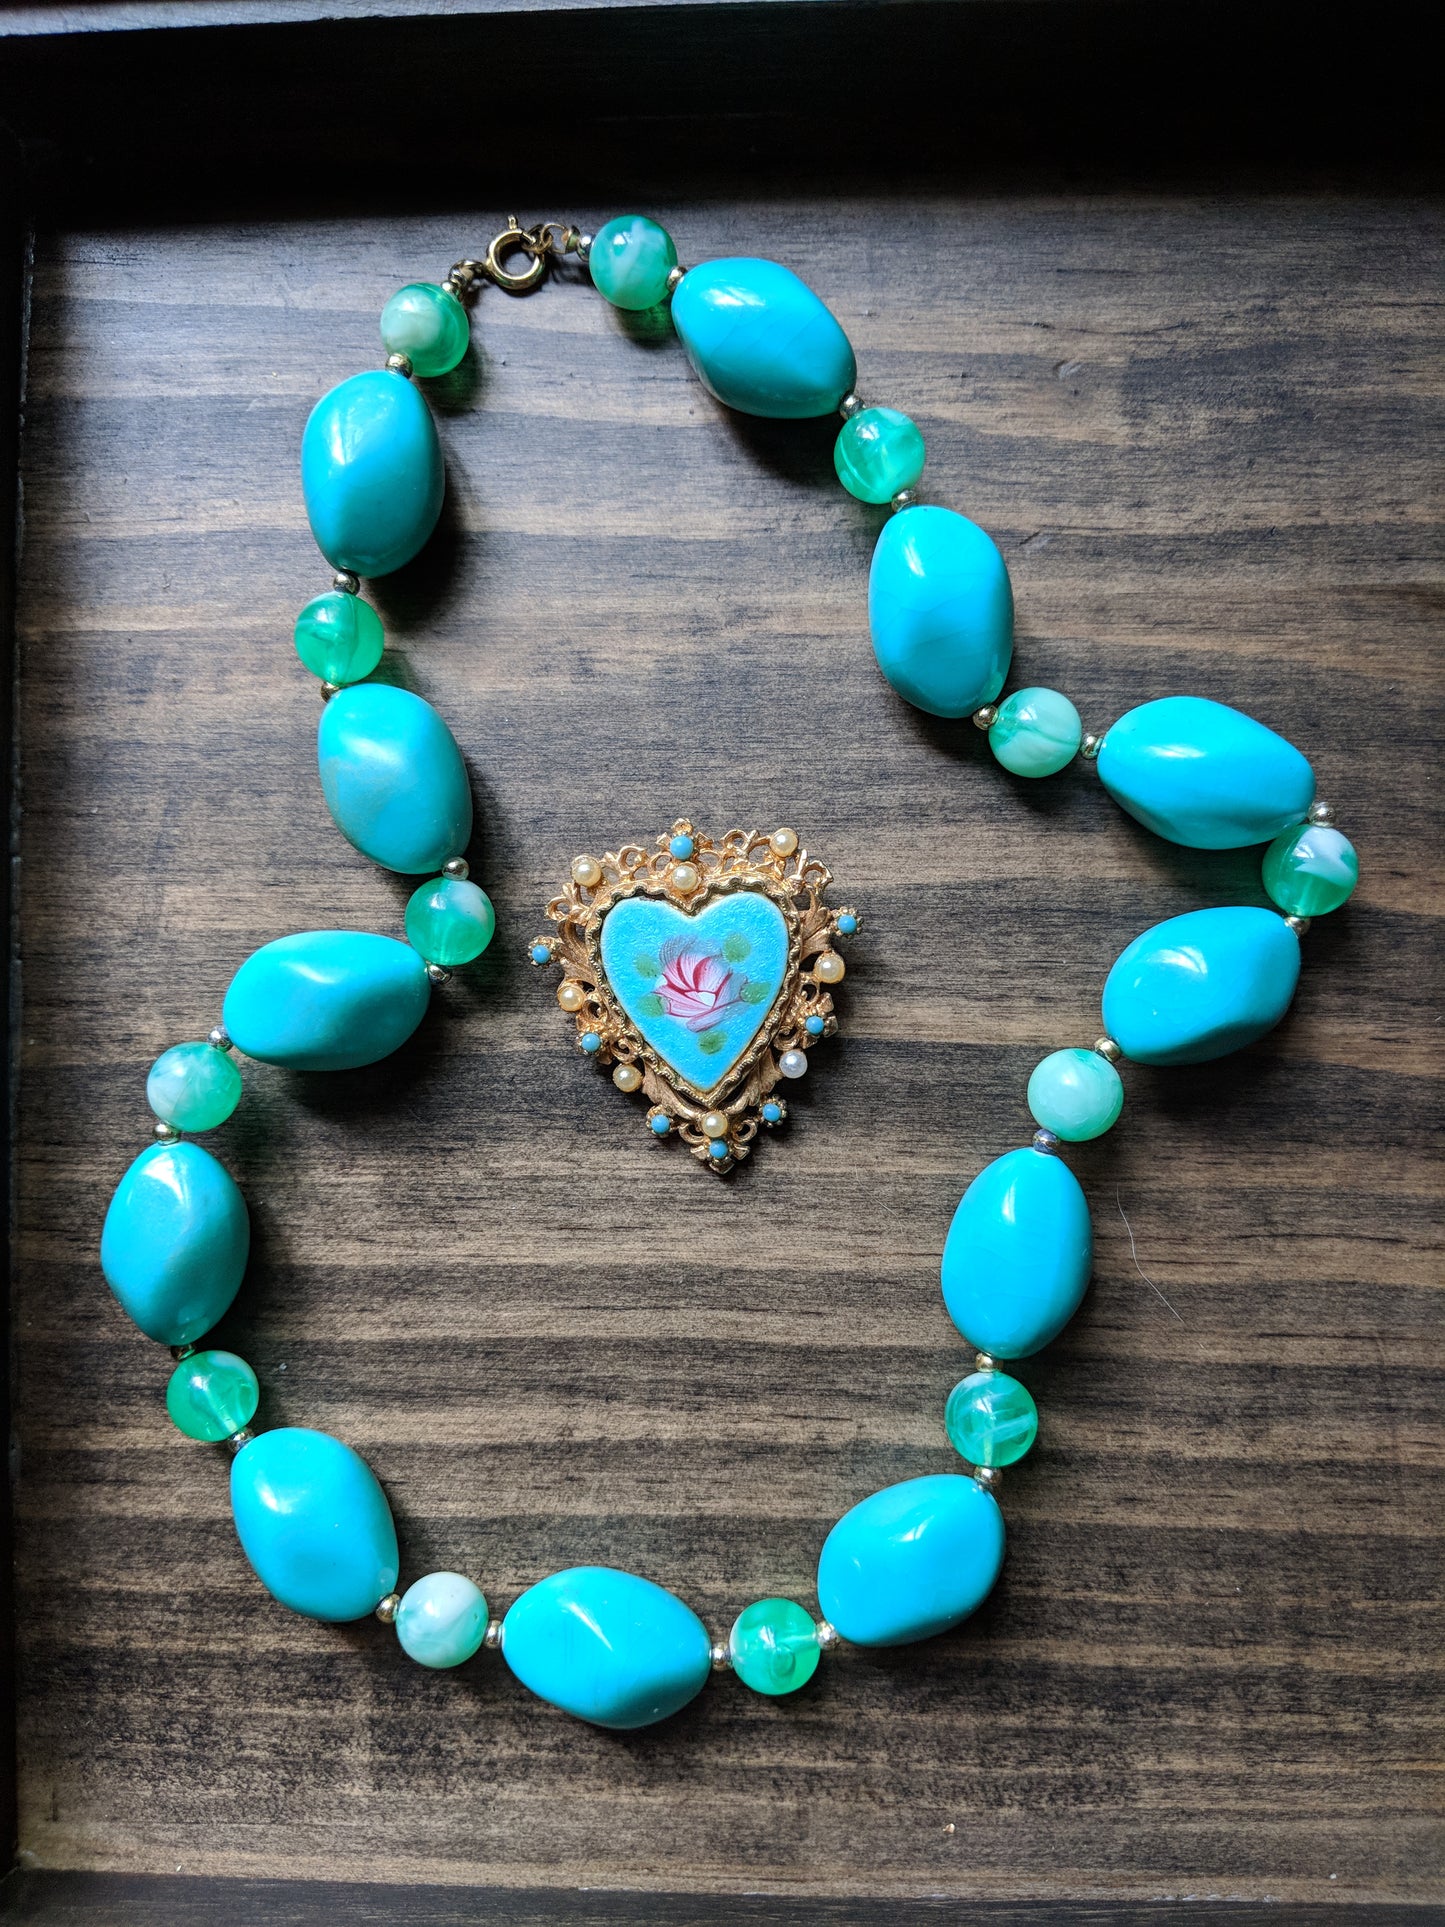 Vintage Turquoise Beaded Necklace & Heart Brooch by ART